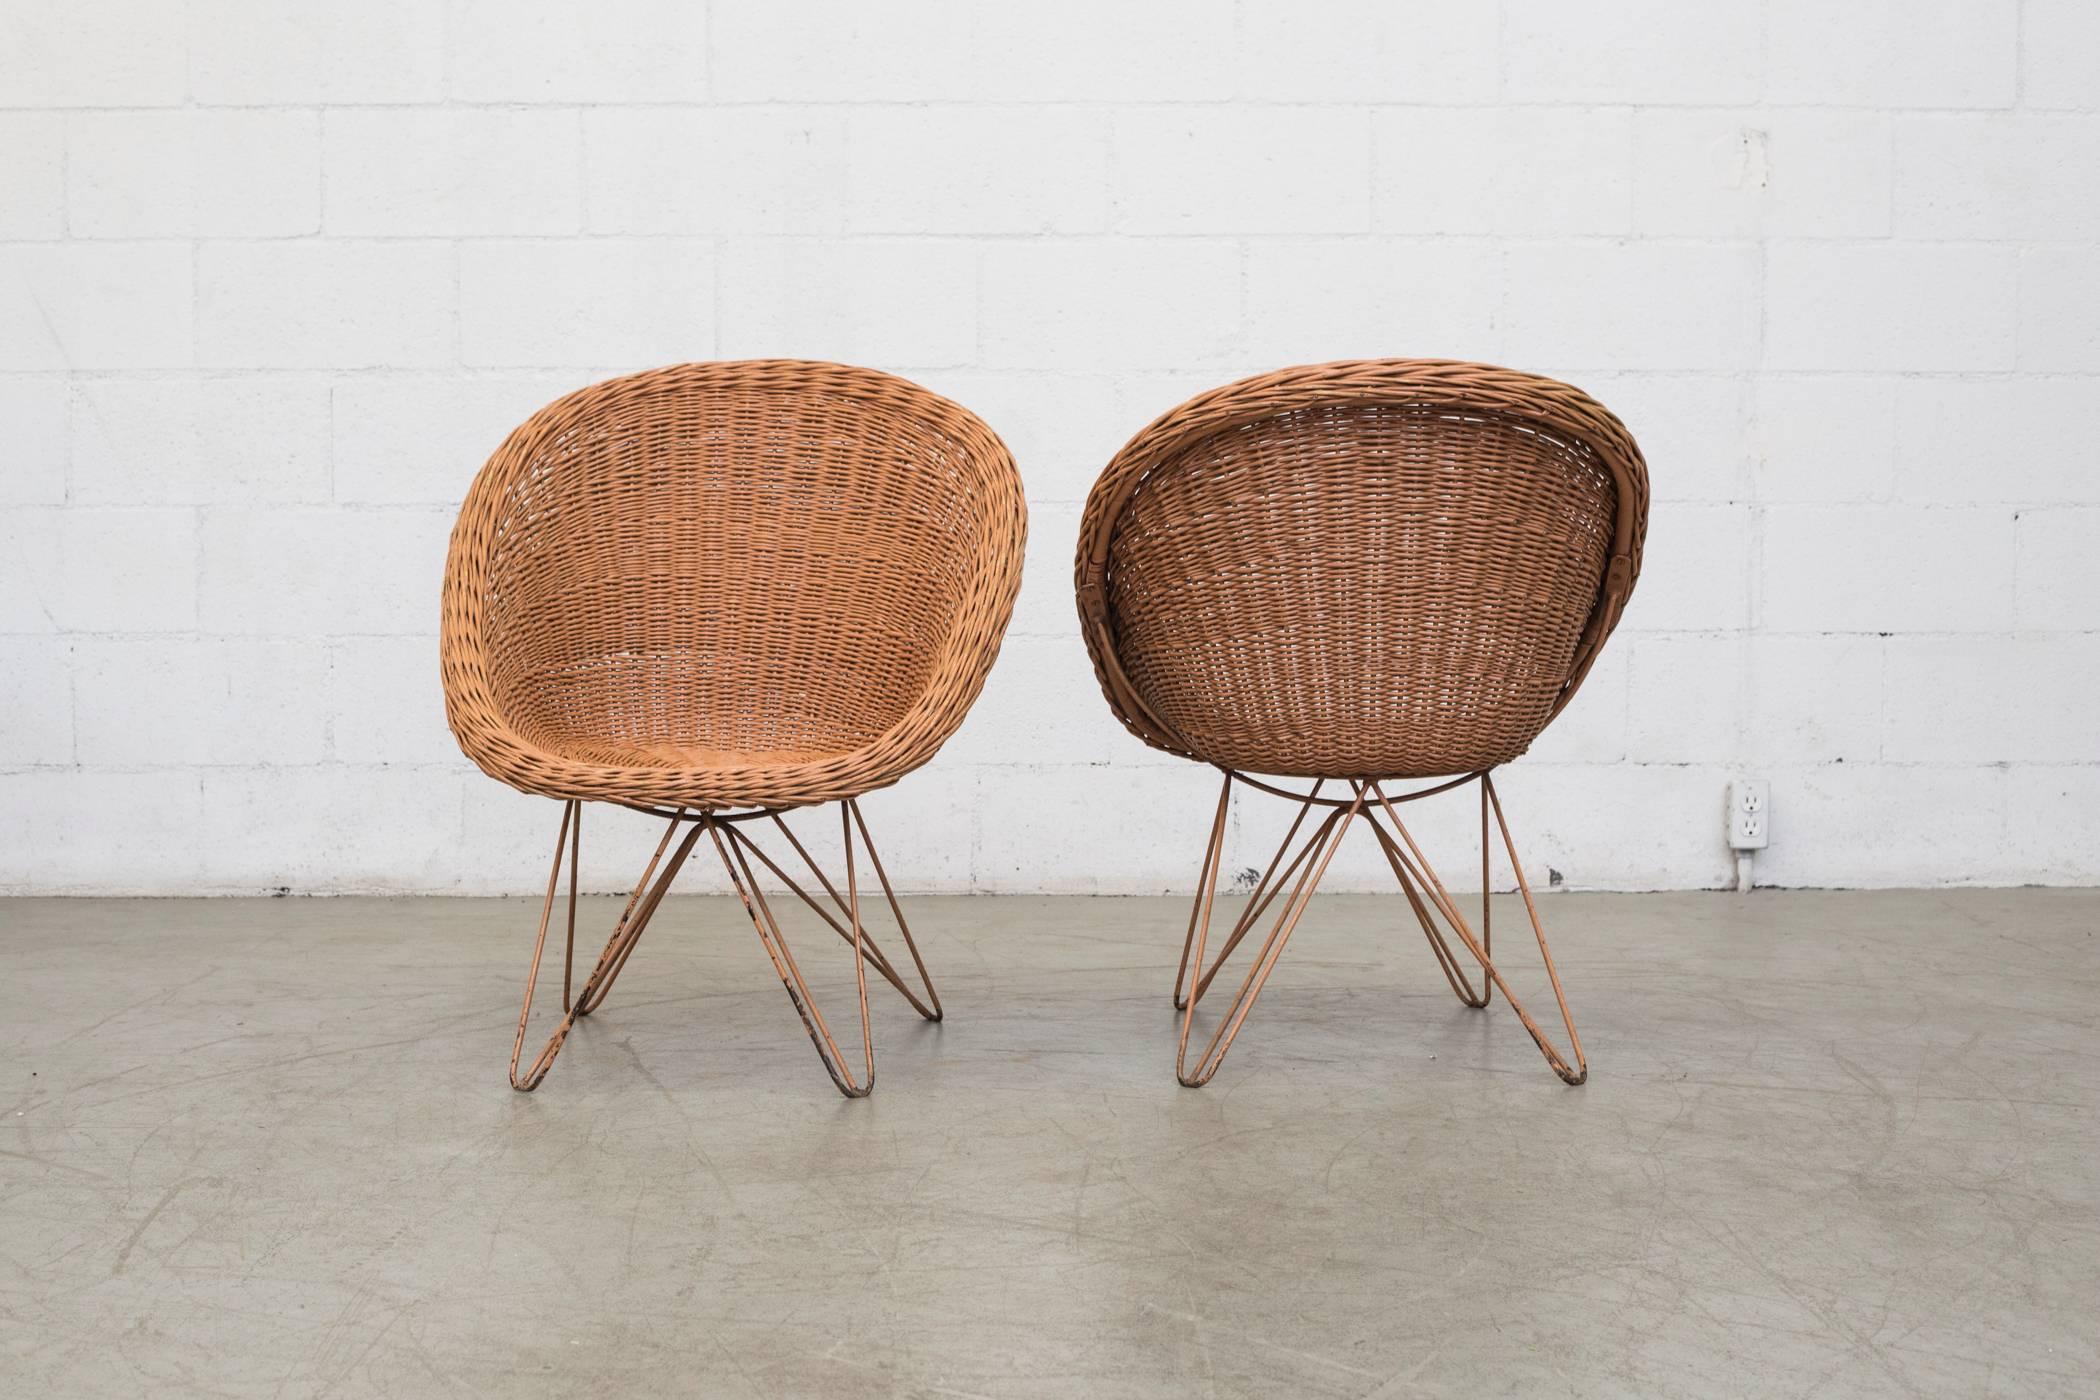 Incredible pair of woven rattan chairs in mauve with matching enameled mauve frame in the style of Jacques Adnet. Visible wear and use consistent with their age.

 